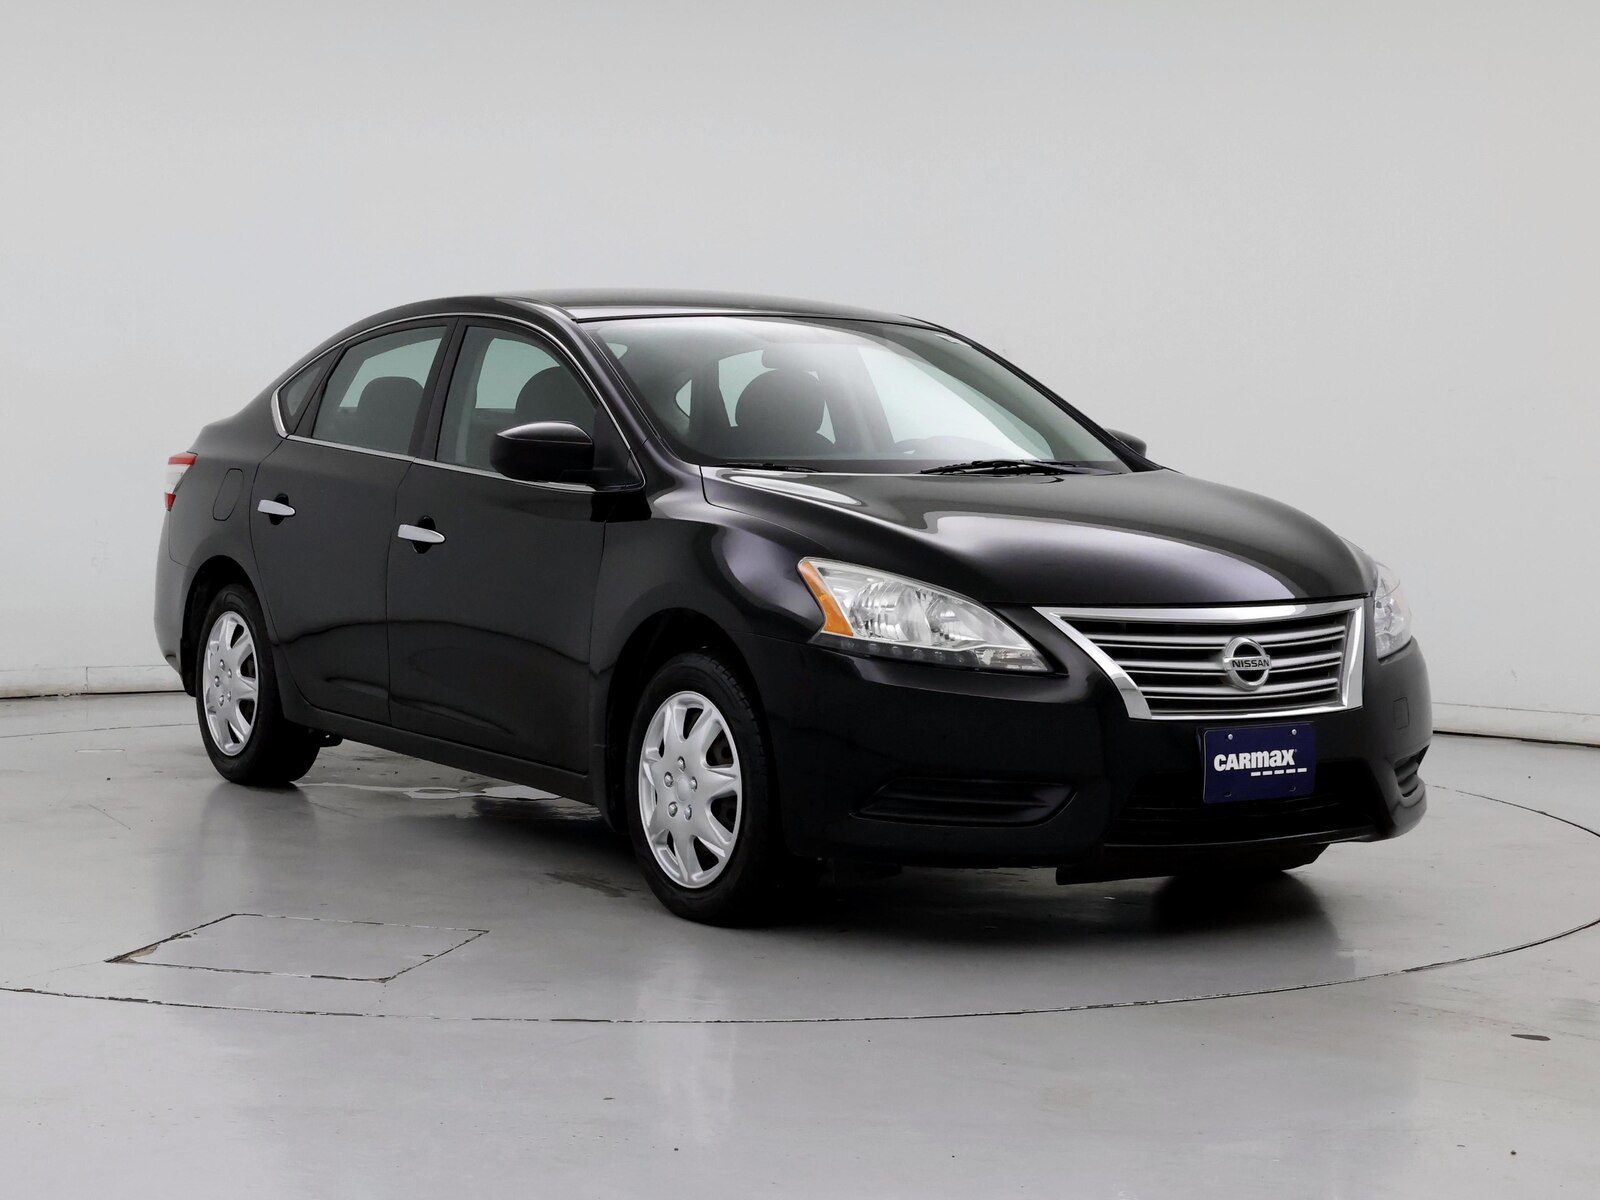 Used 2014 Nissan Sentra SV with VIN 3N1AB7AP2EY202681 for sale in Kenosha, WI